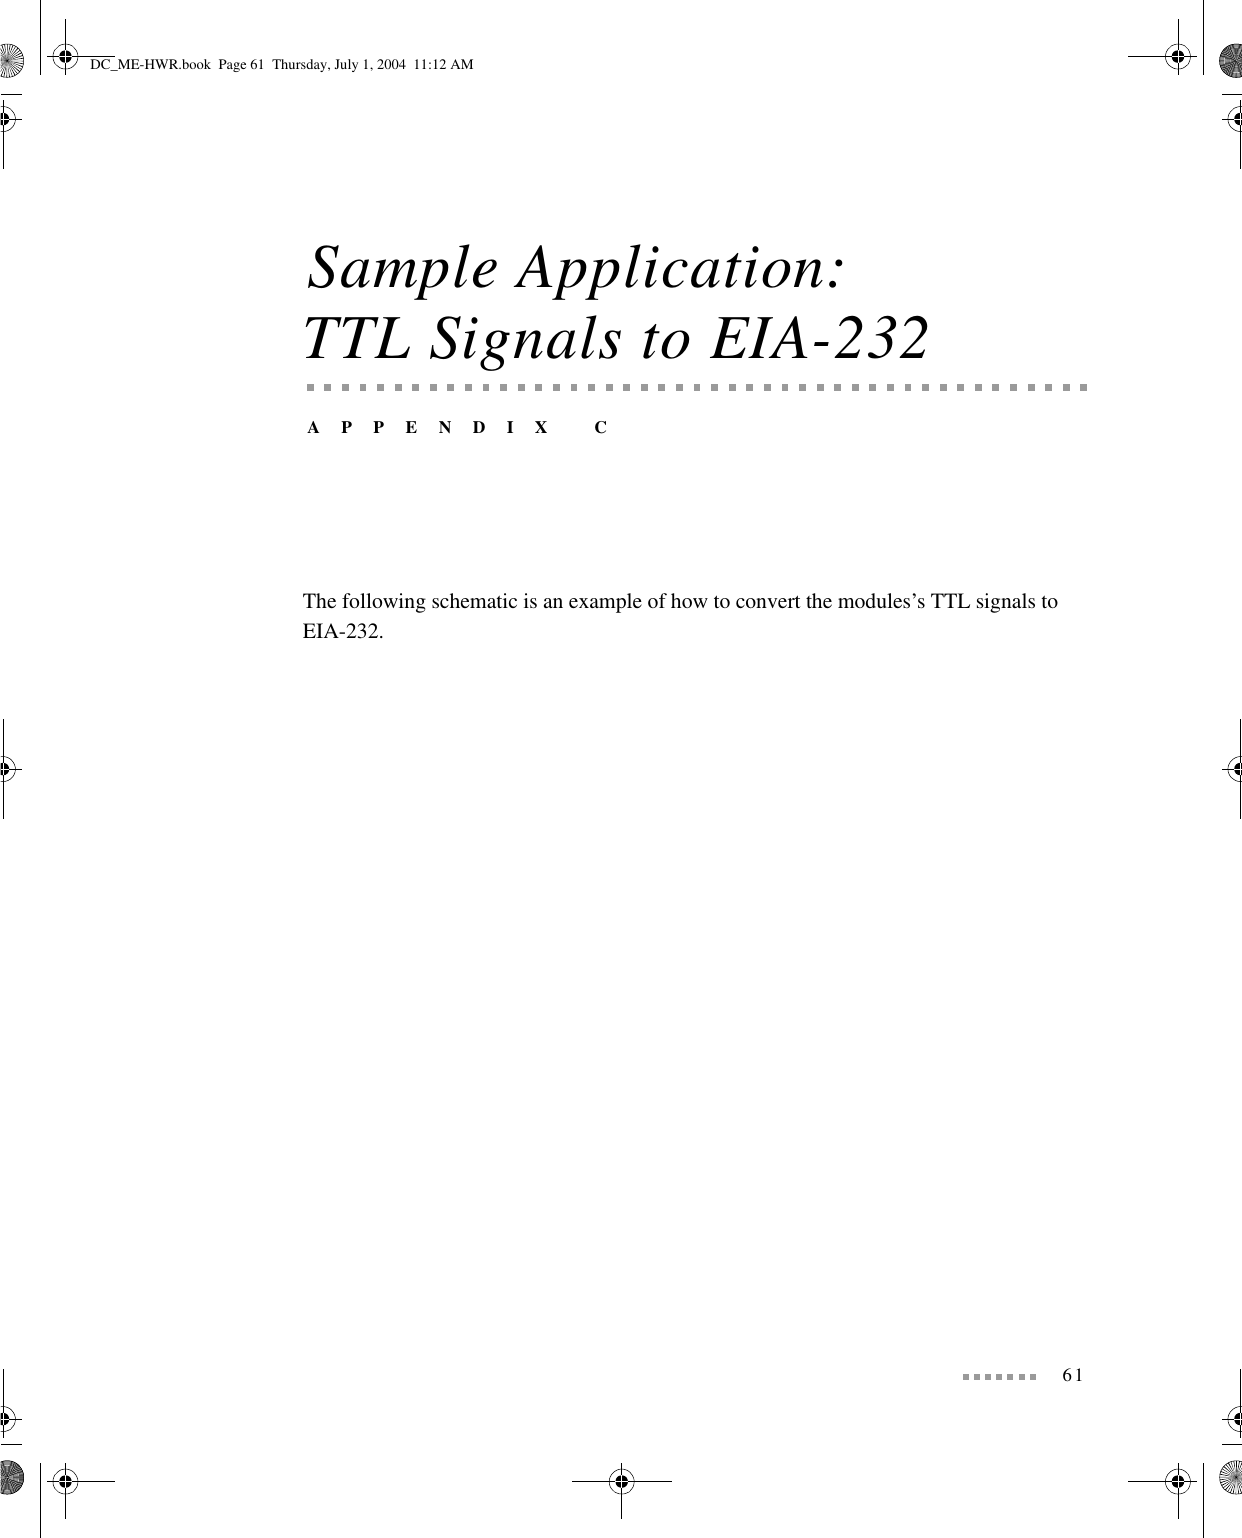 61Sample Application: TTL Signals to EIA-232APPENDIX CThe following schematic is an example of how to convert the modules’s TTL signals to EIA-232. DC_ME-HWR.book  Page 61  Thursday, July 1, 2004  11:12 AM